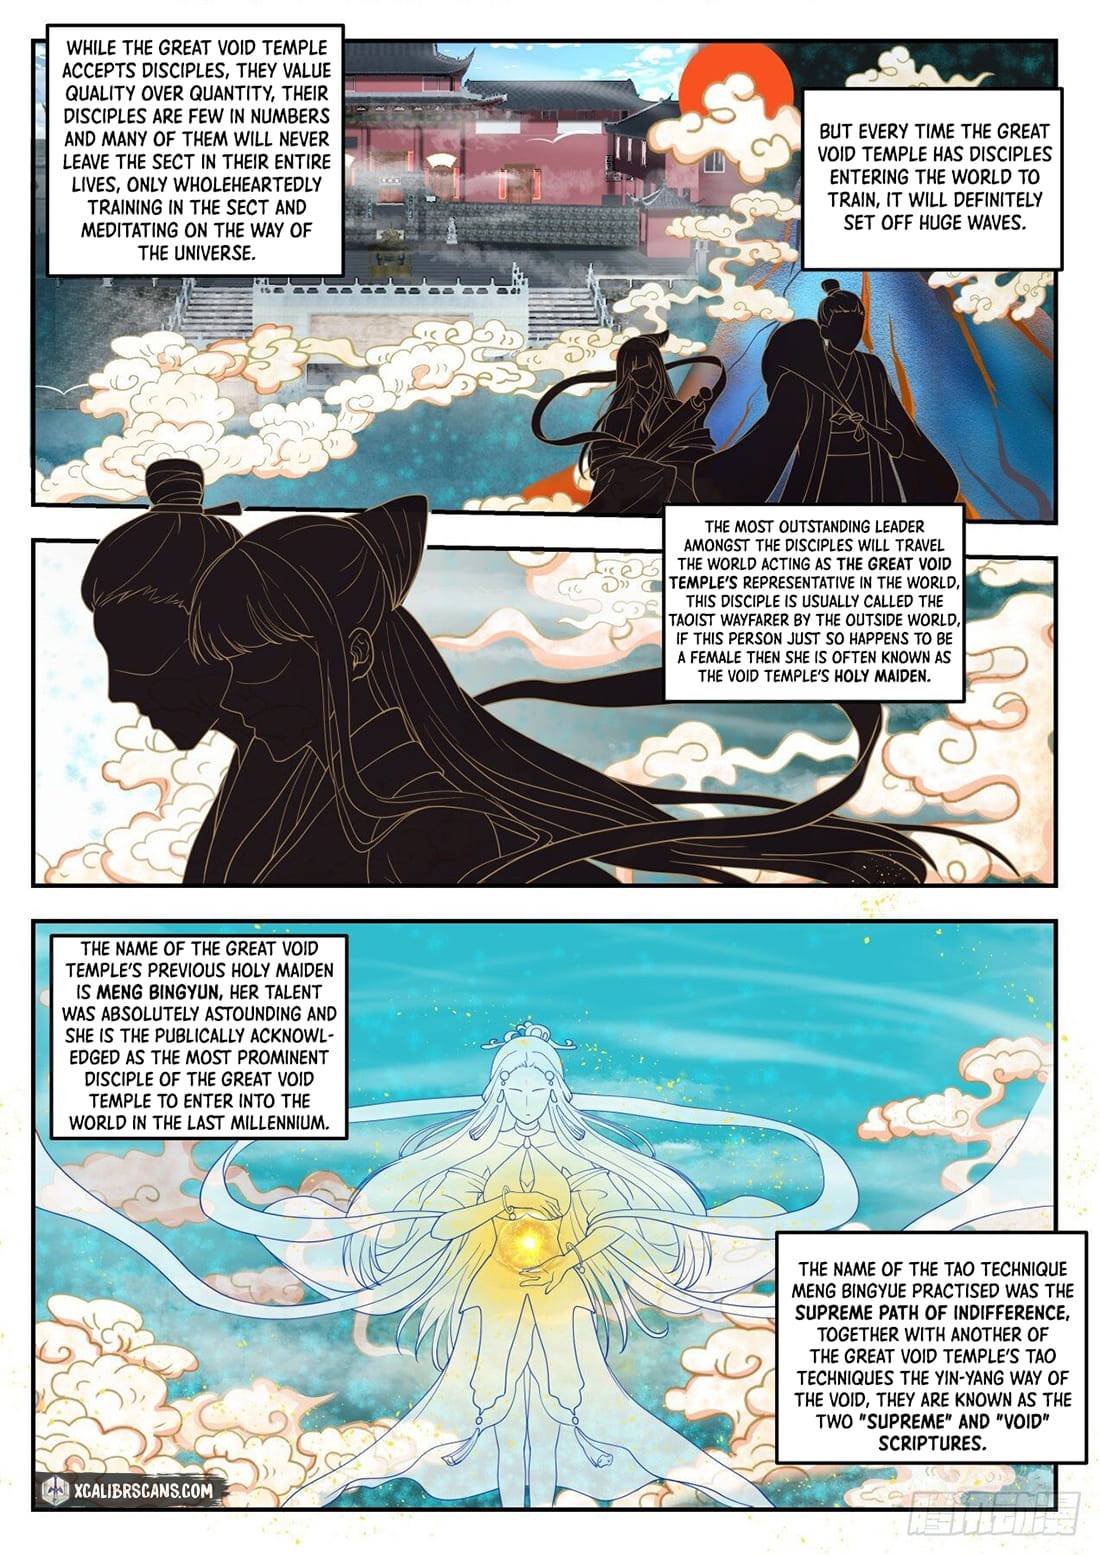 History's Number 1 Founder chapter 24 page 5